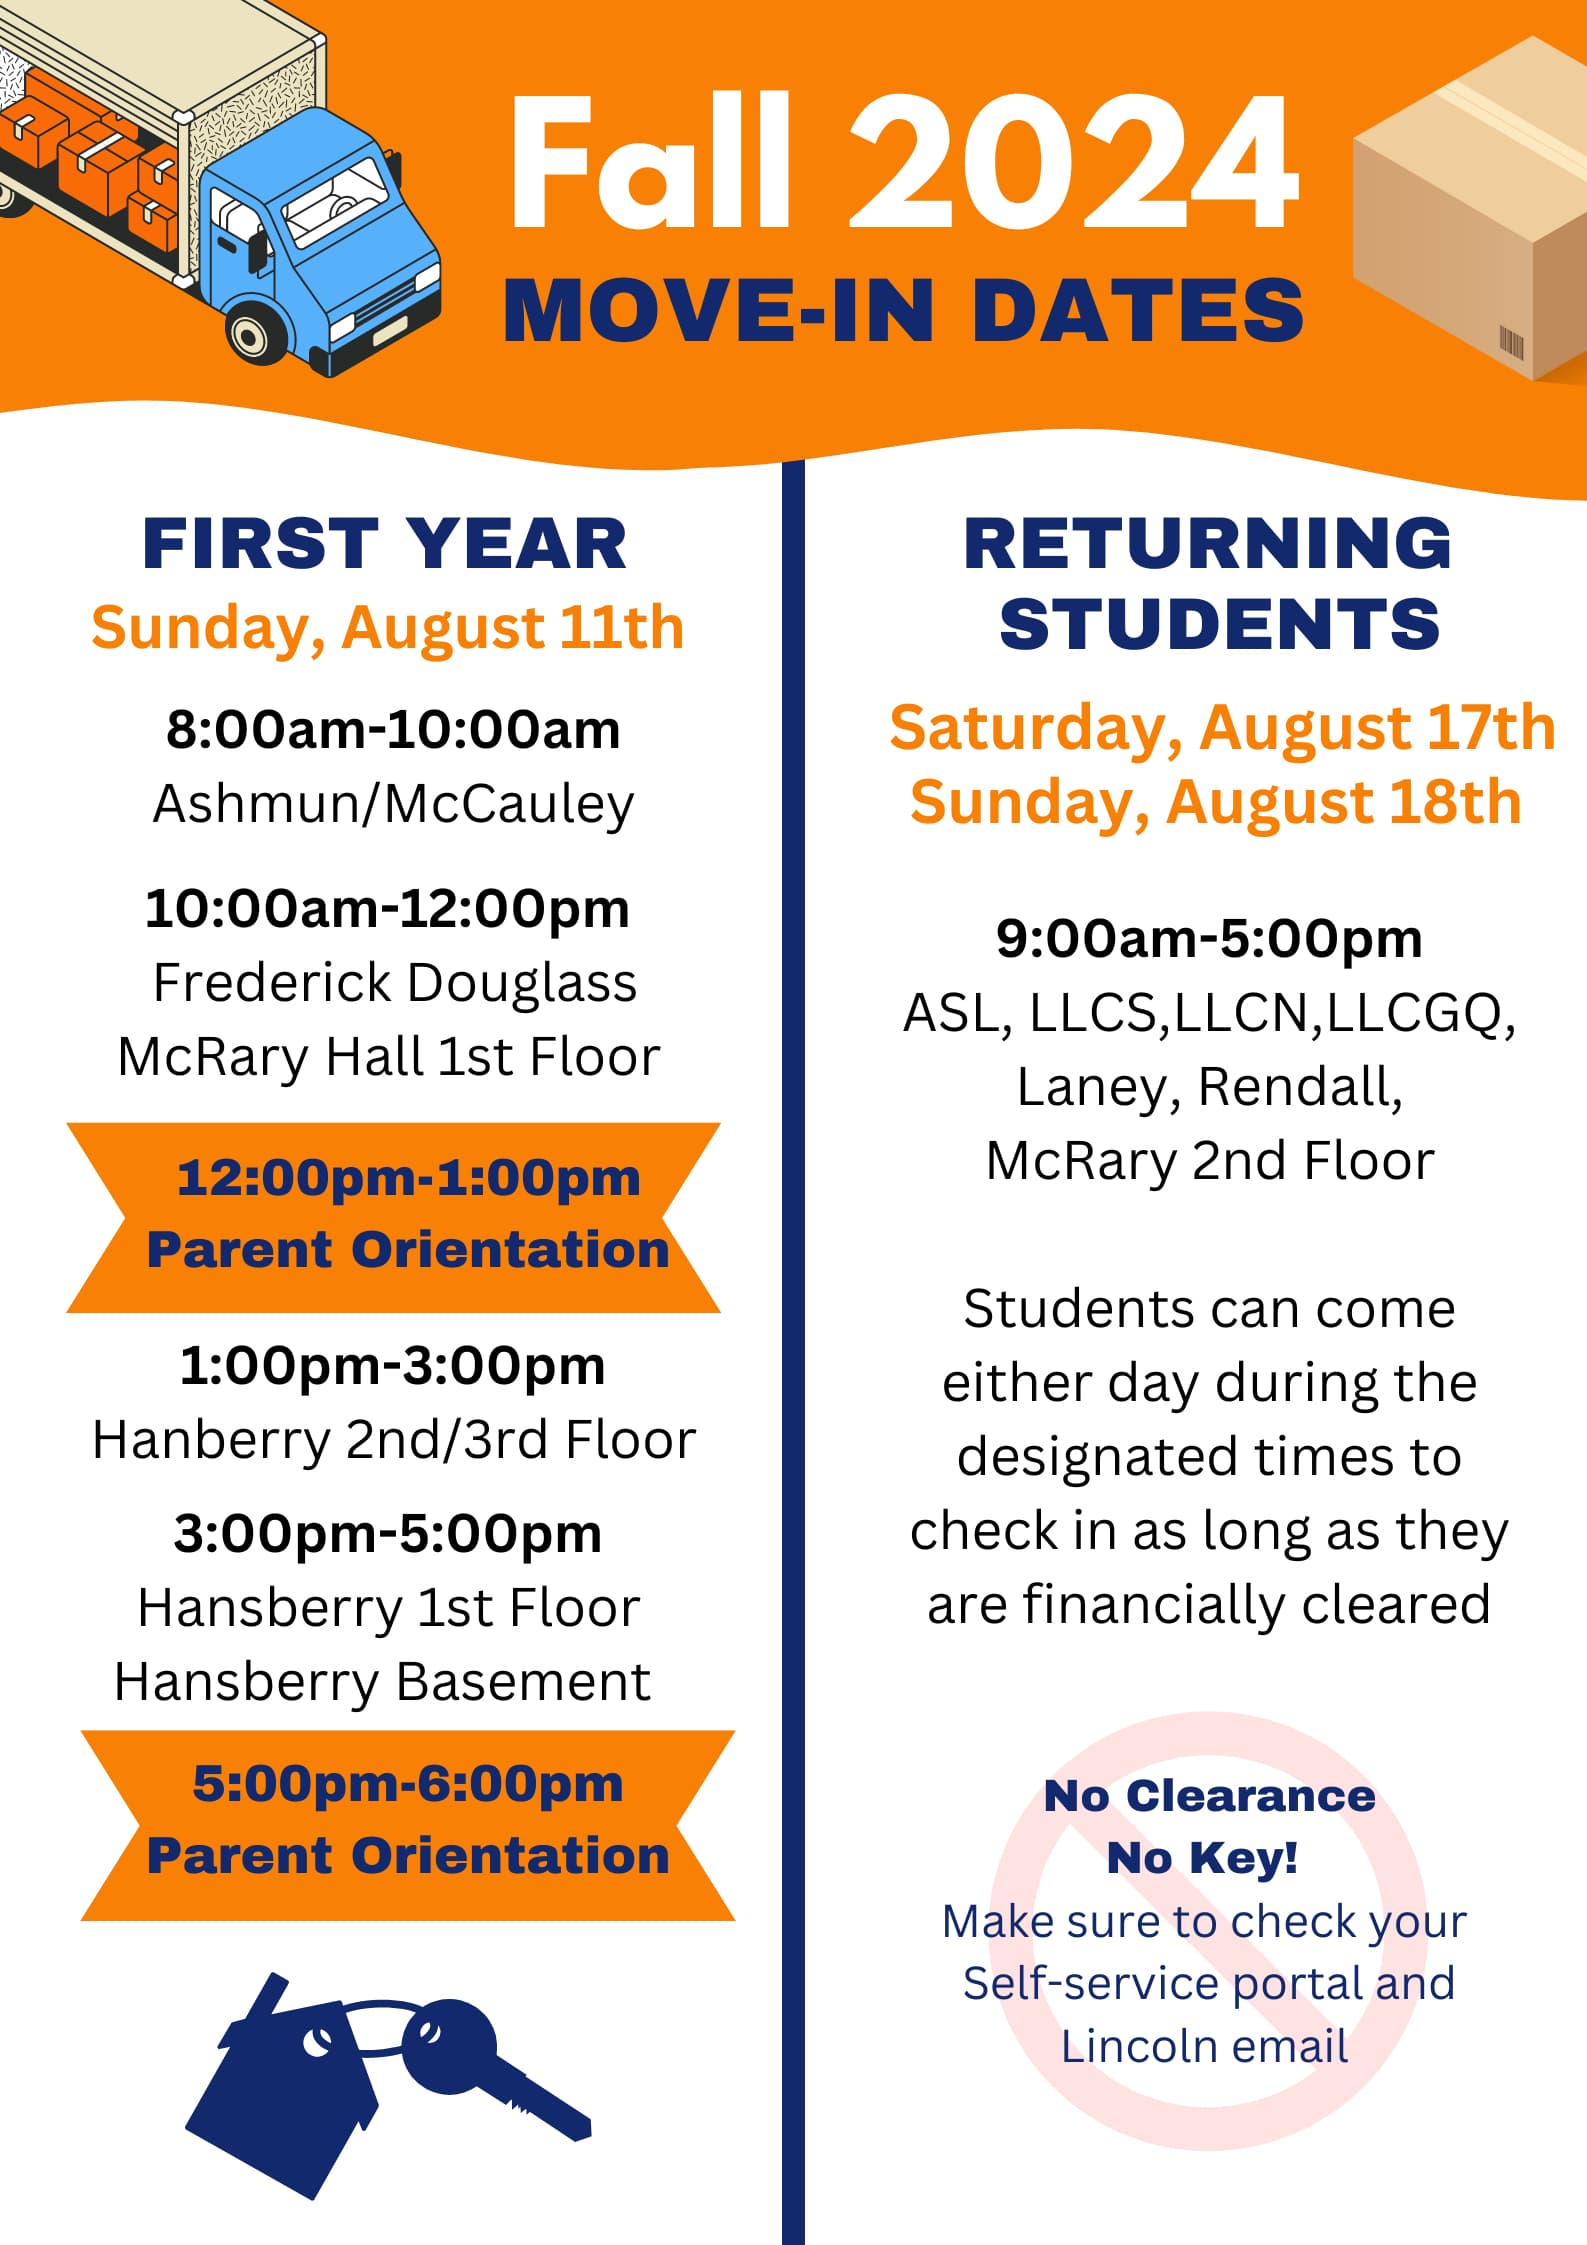 Residence Life Flyer with FA24 move-in info